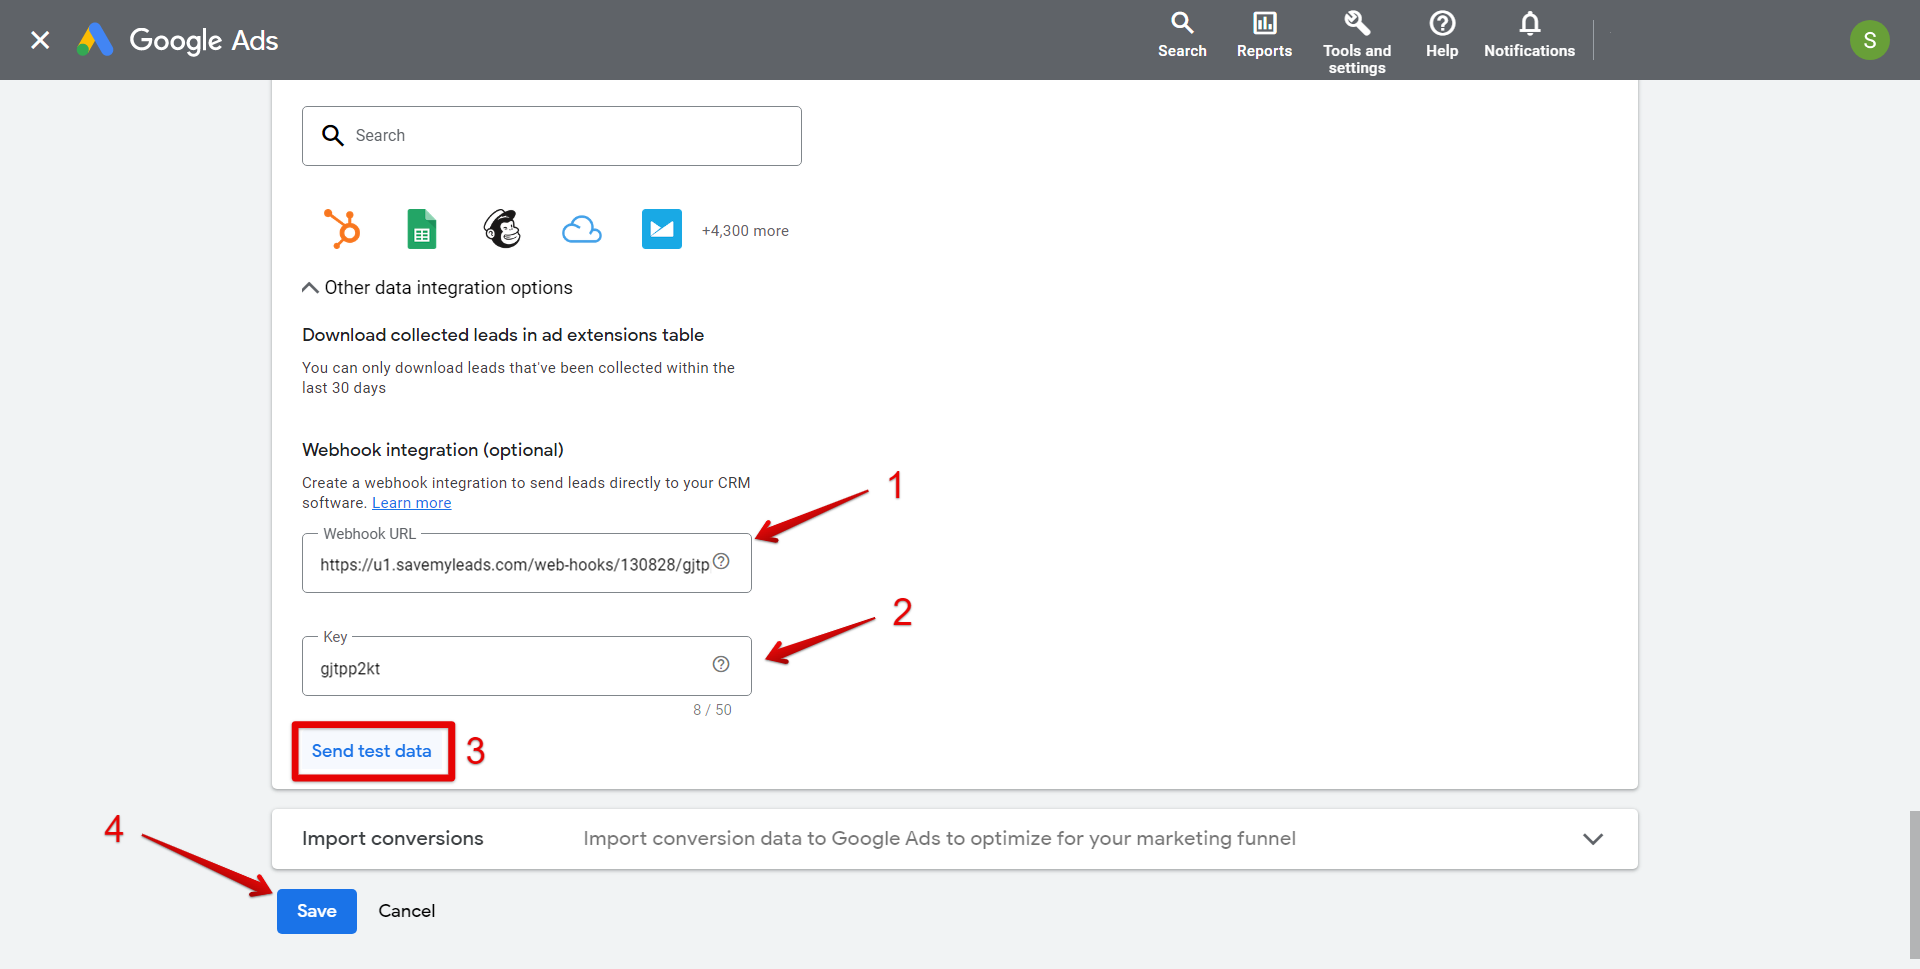 How to Connect Google Lead Form with Salesforce CRM Create Lead | Data Source account connection